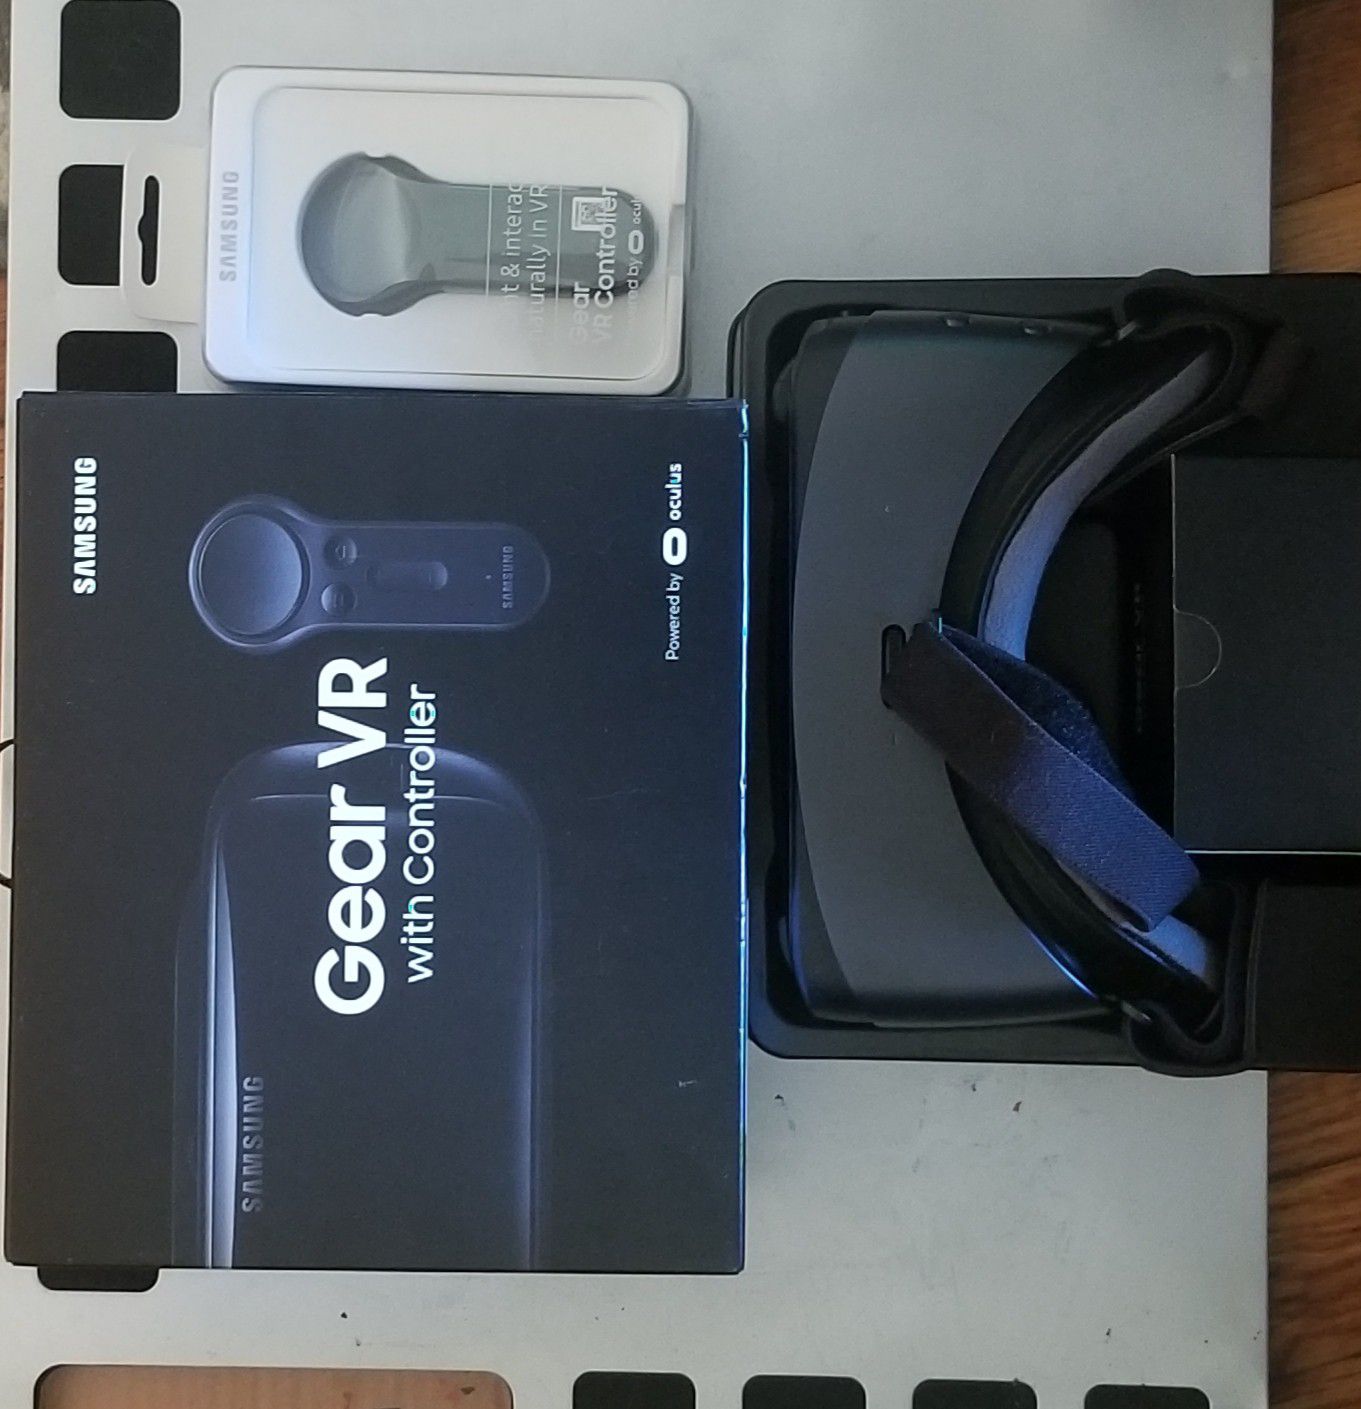 BRAND NEW Samsung gear vr in box with manual and controller.